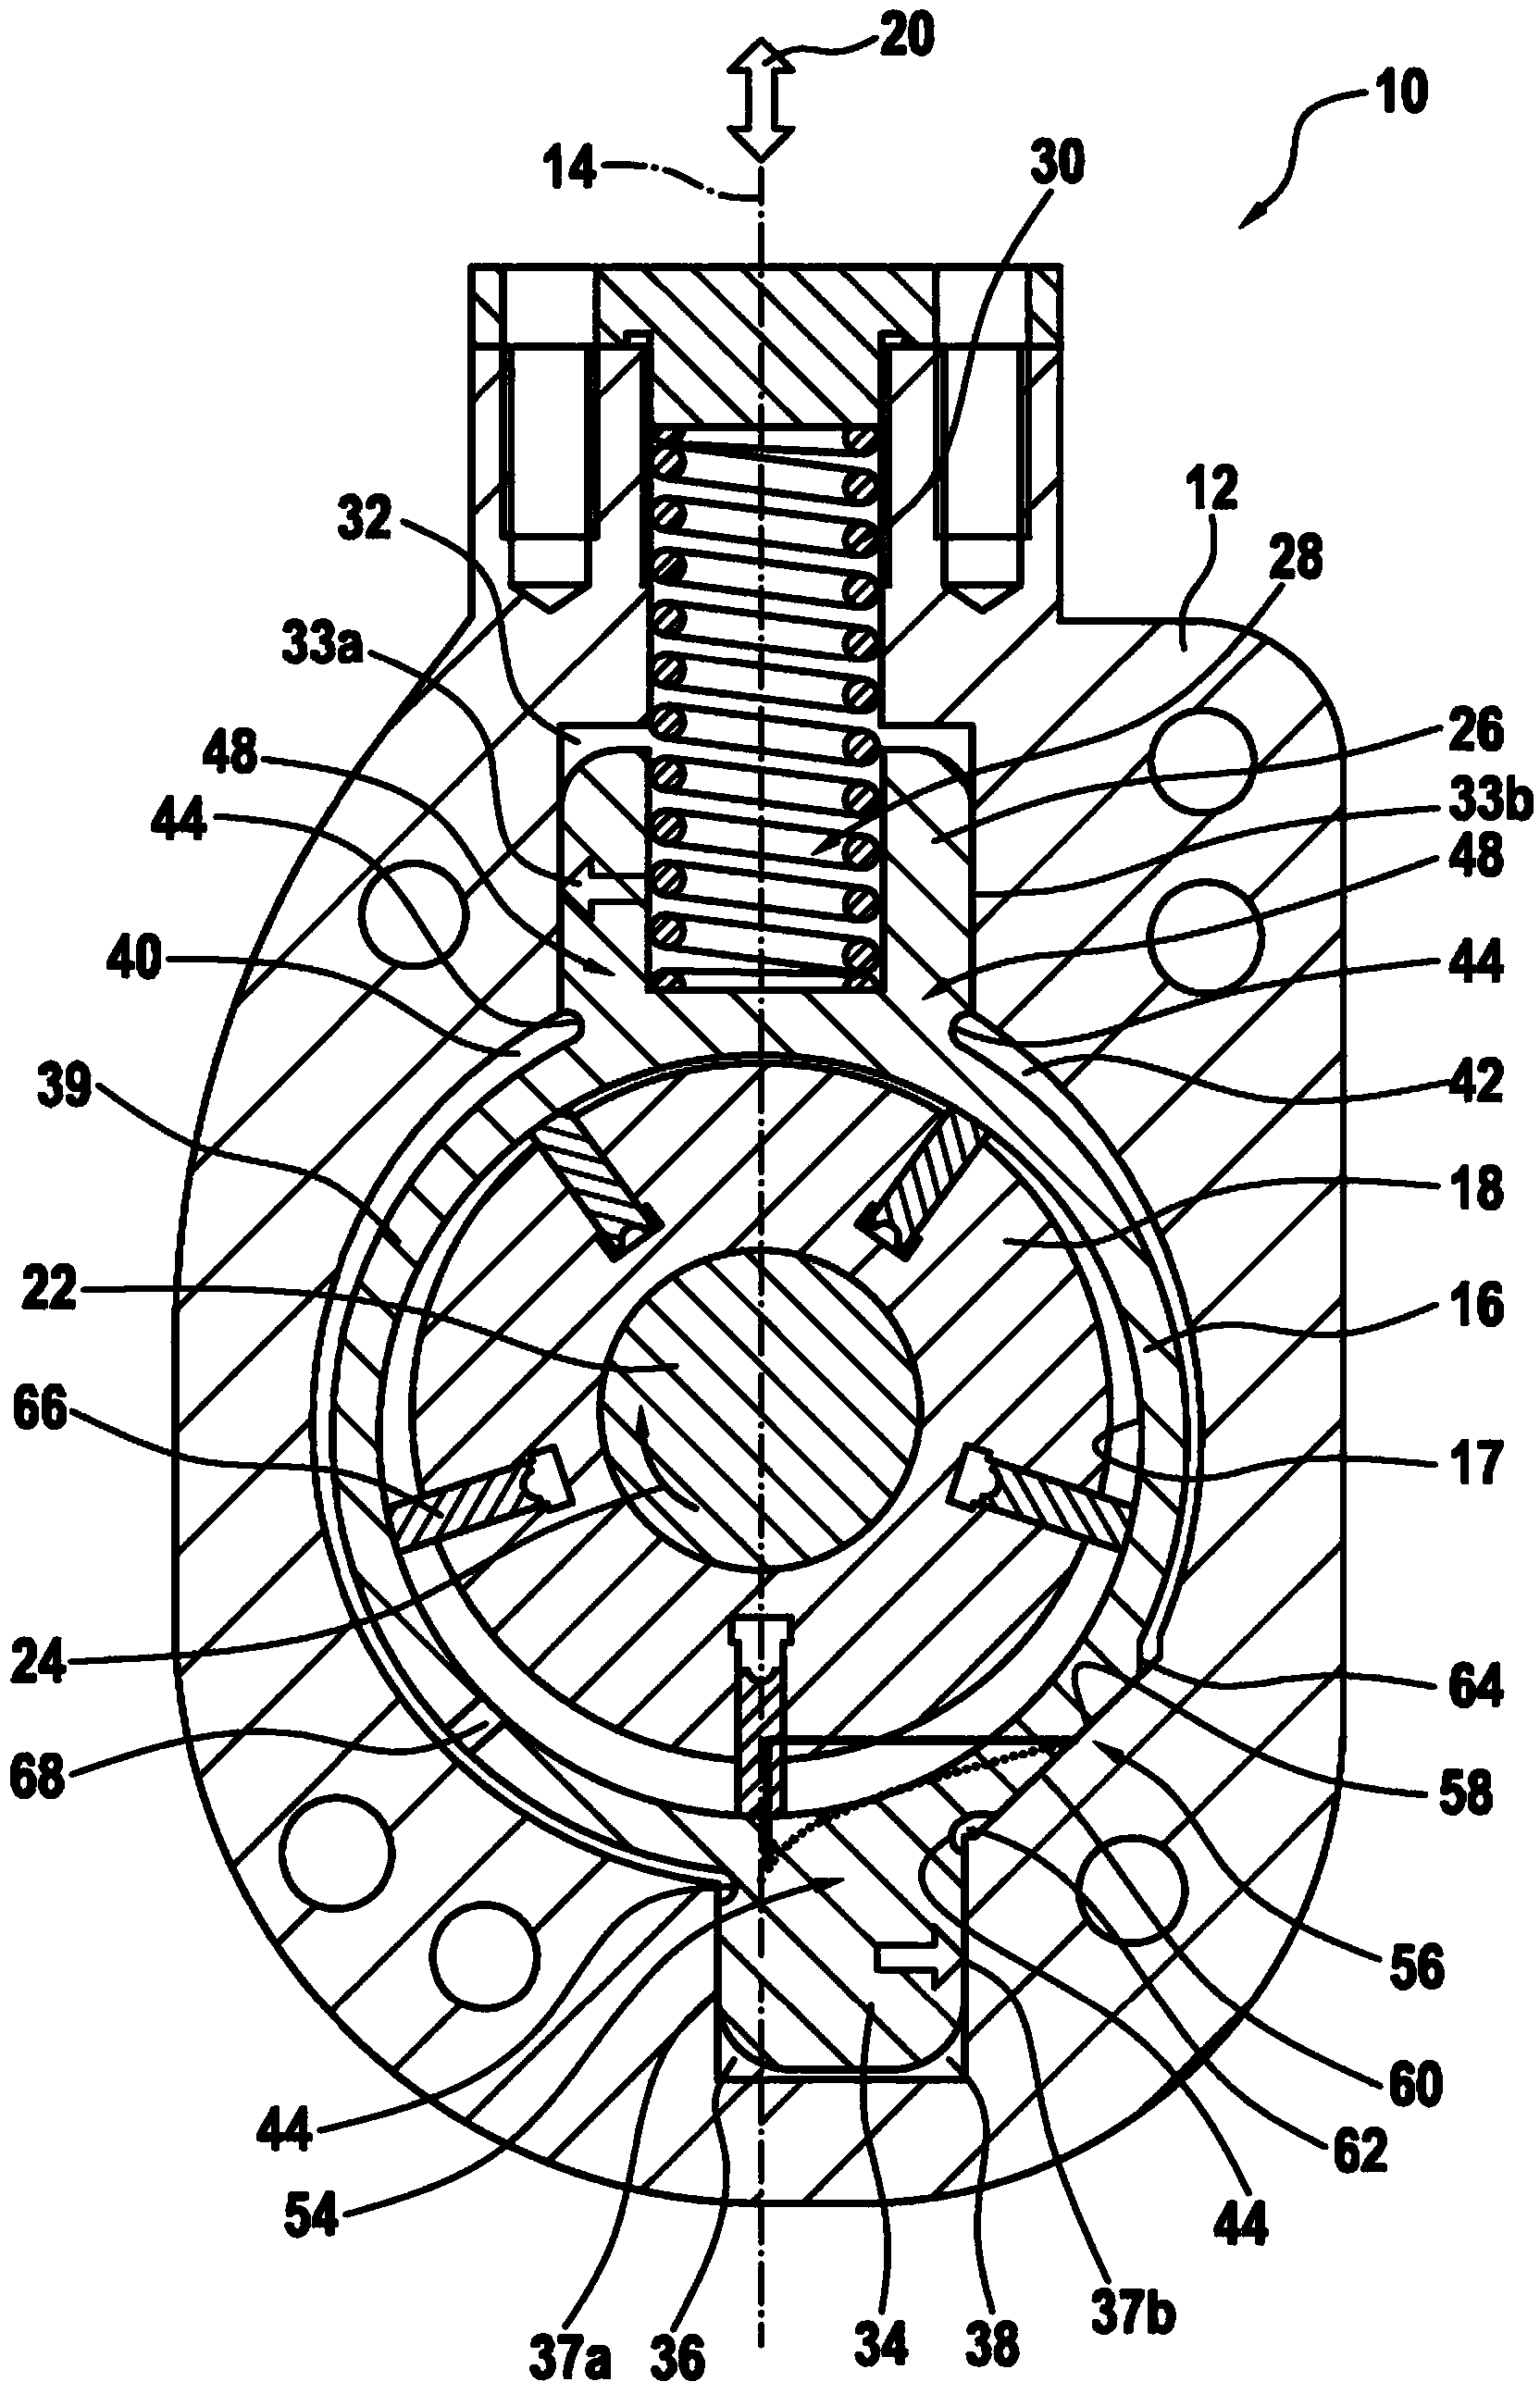 Vane-type pump having a housing, having a displaceable stator, and having a rotor that is rotatable within the stator